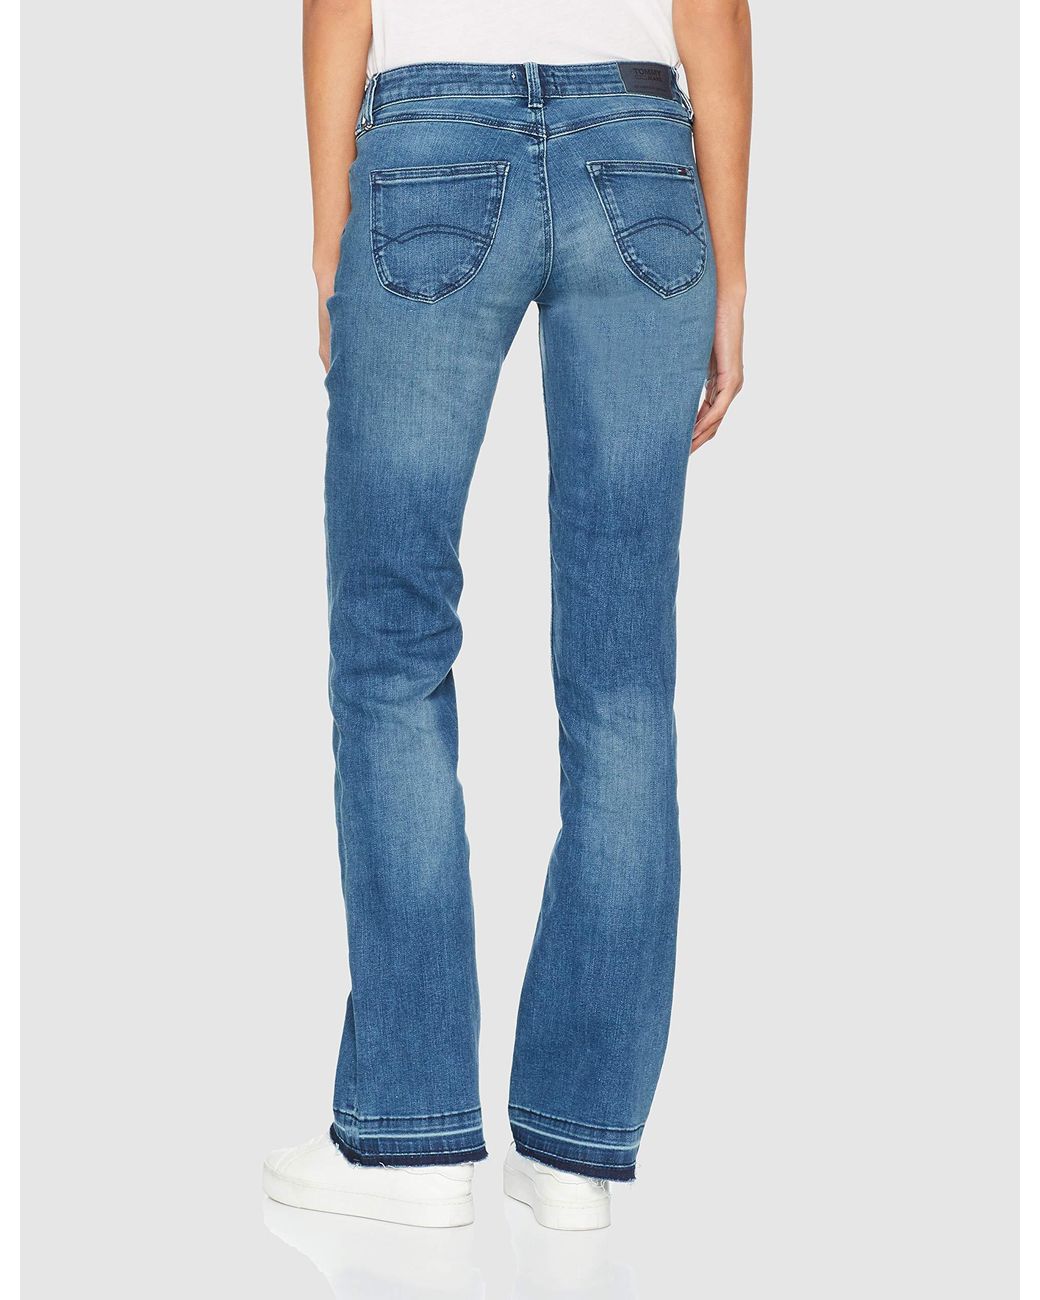 Tommy Hilfiger Denim Low Rise Boot Sophie Boot-Cut Bootcut Jeans in Blau -  Lyst